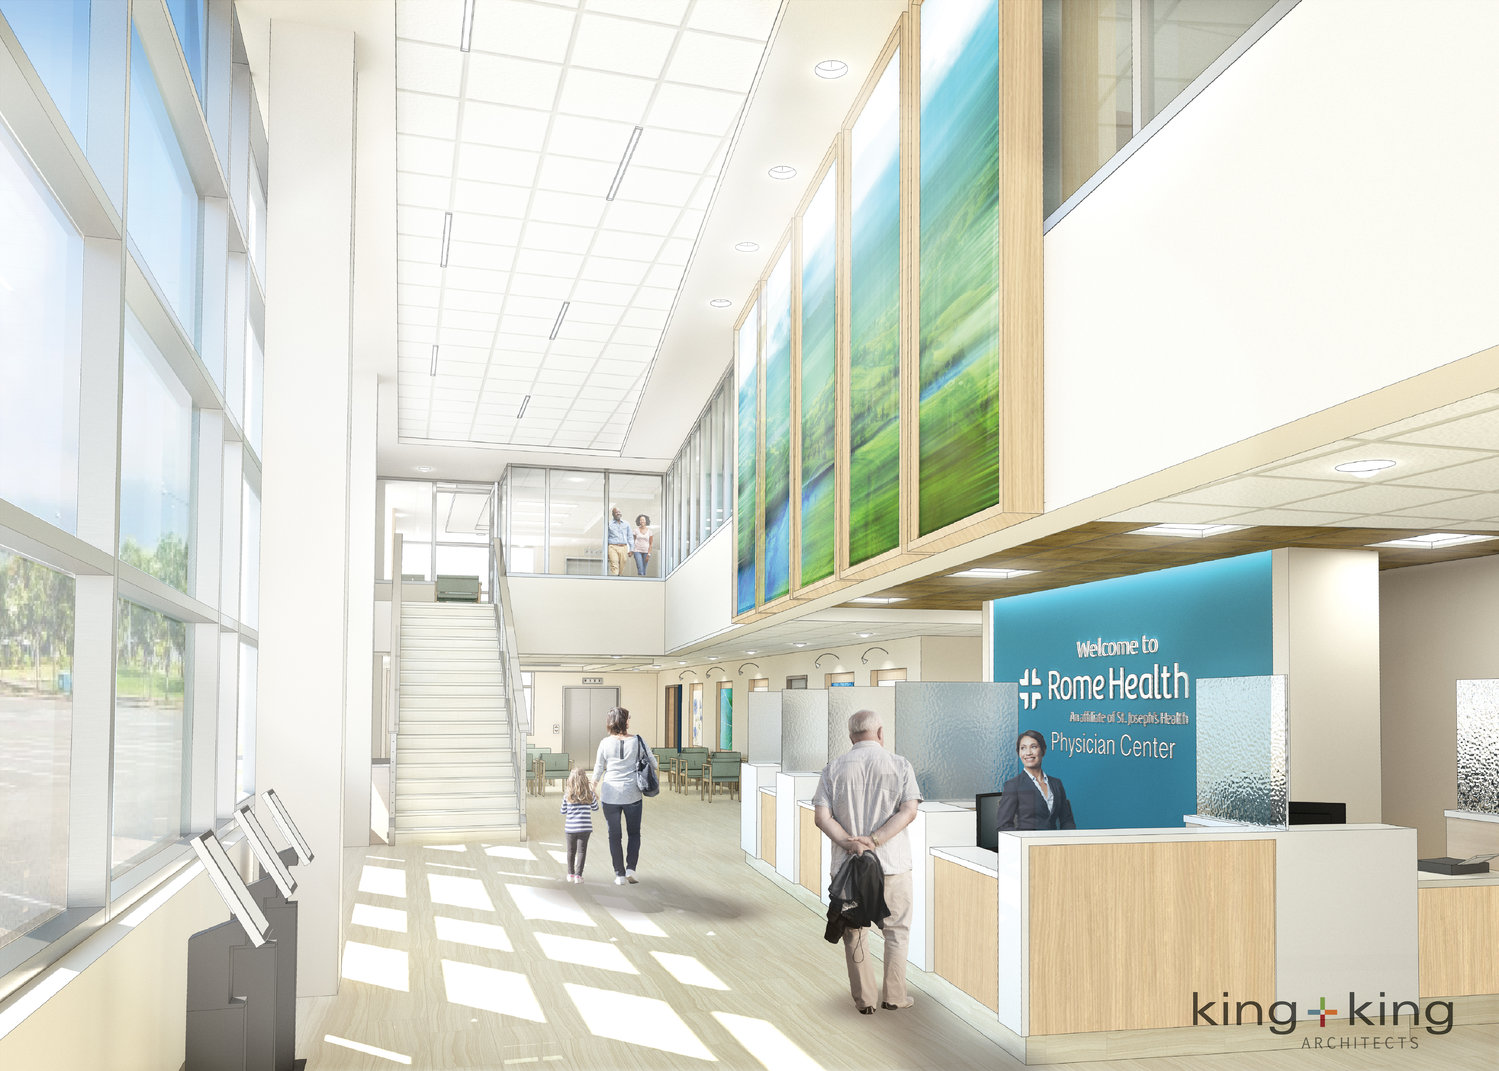 GLIMPSE INTO THE FUTURE — Here is an artist’s rendering of the $11.4 million Physican Center, which broke ground today at Rome Health. When complete, providers from the hospital’s affiliated practices will relocate to the new center at Rome Health, 1500 N. James St.